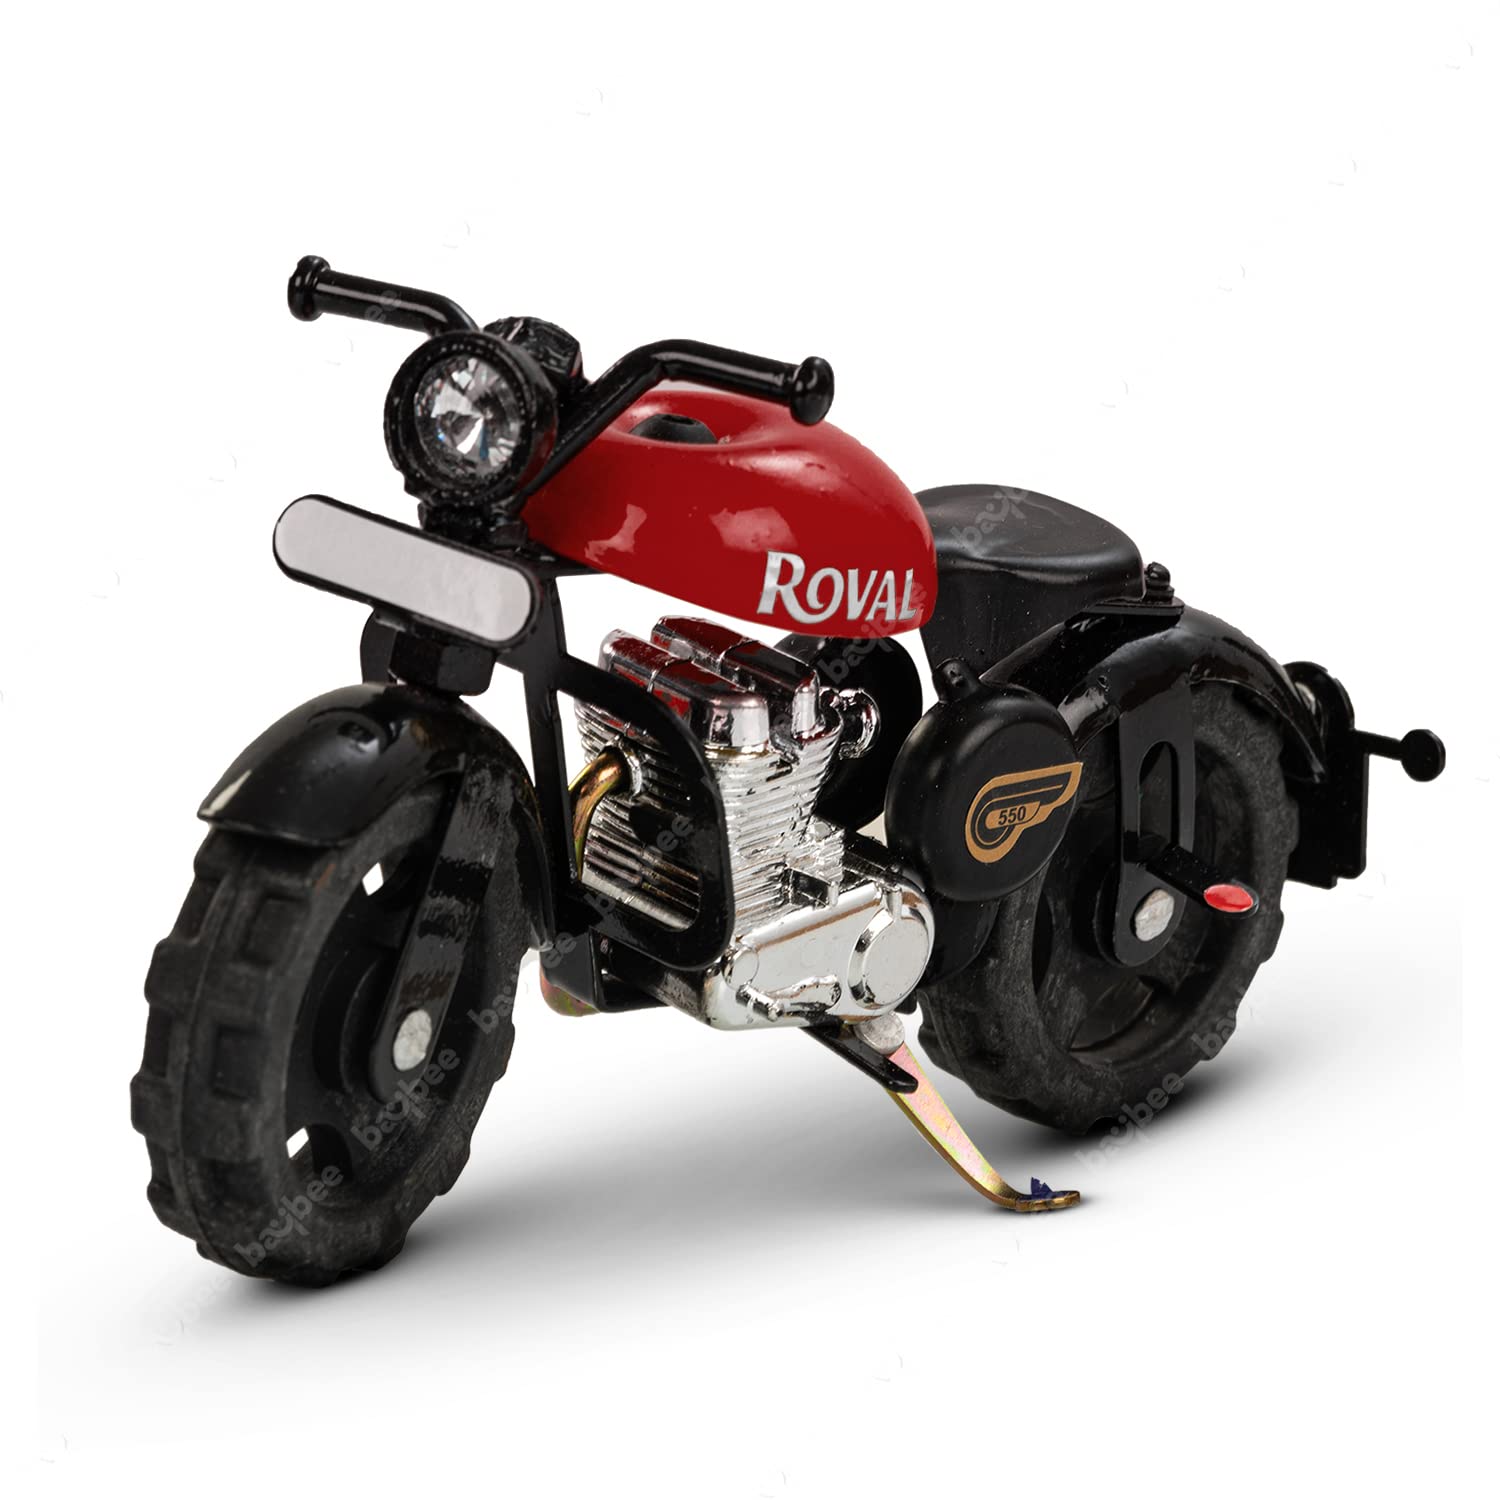 LAEMENOZ Compatible for 1:12 Harley Motorcycle Model, DieCast Mini Toy  Motorcycle, Pull Back Toy Cars, Motorcycle Collection for Boys Kids【Pack of  1】 : Amazon.in: Toys & Games